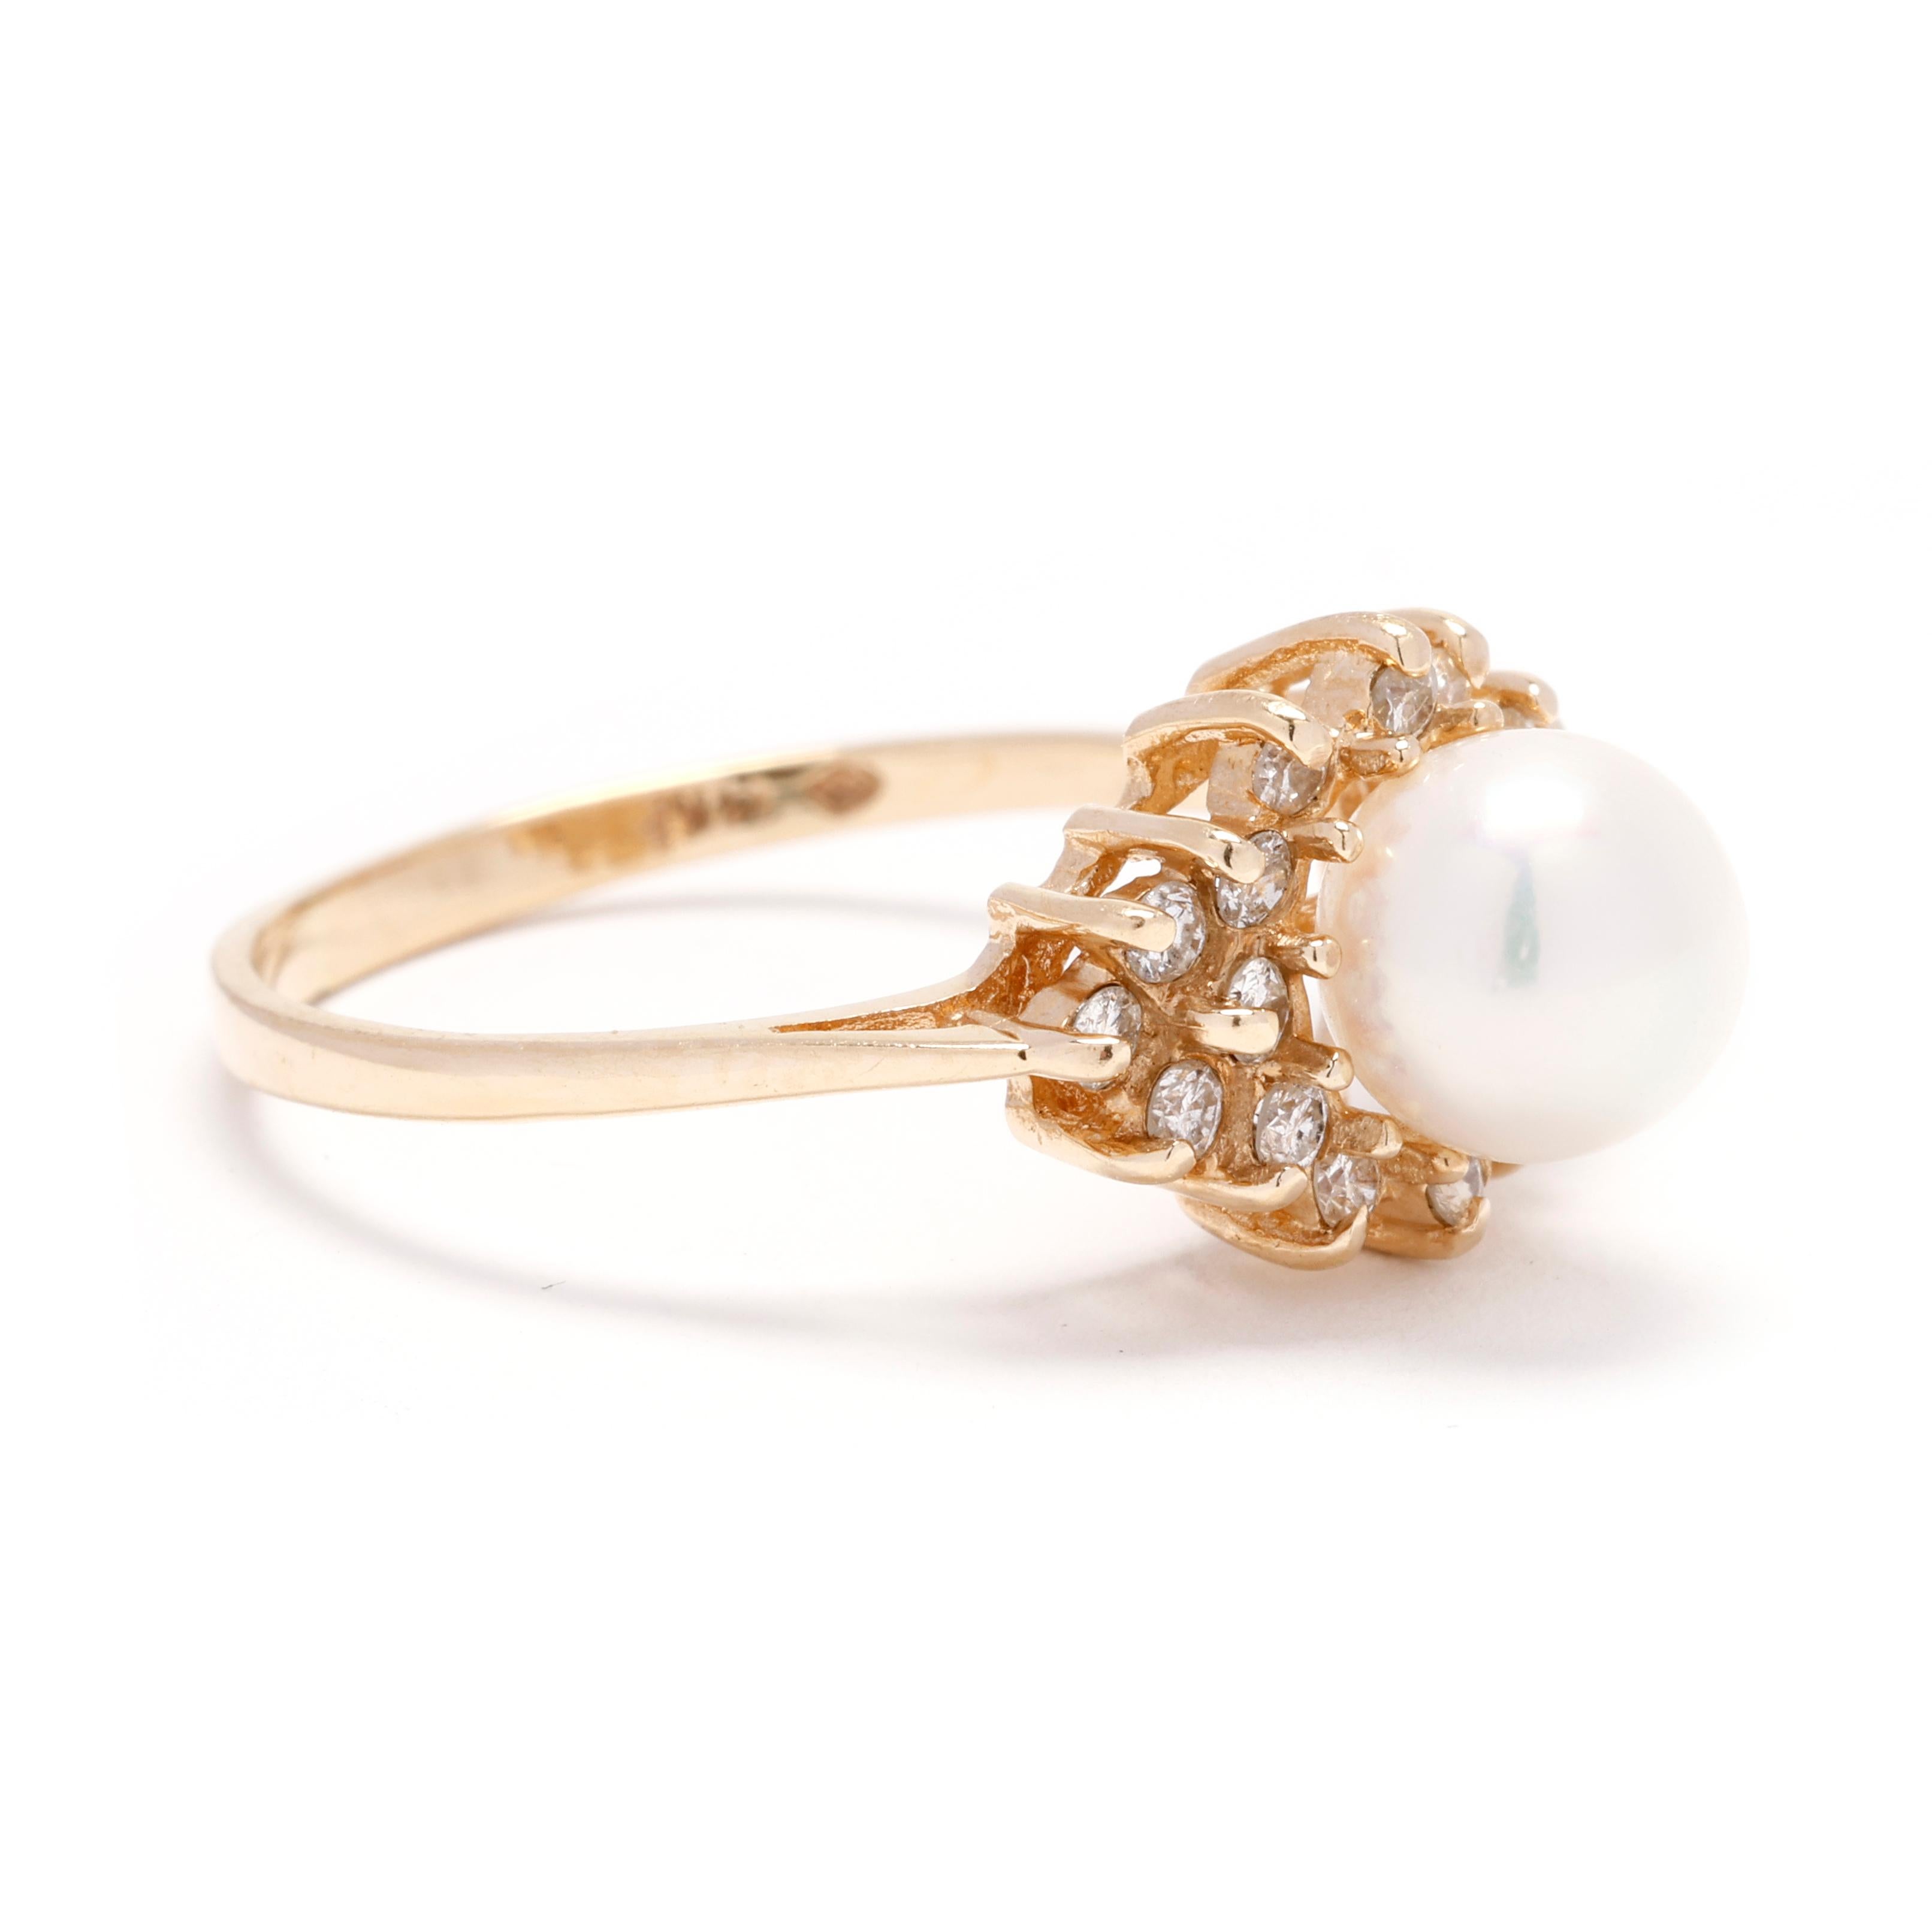 Elevate your elegance with this exquisite 0.25ctw Diamond and Pearl Cluster Ring. Meticulously crafted in gleaming 14k yellow gold, this stunning ring features a cluster of sparkling round brilliant diamonds elegantly surrounding a lustrous pearl,